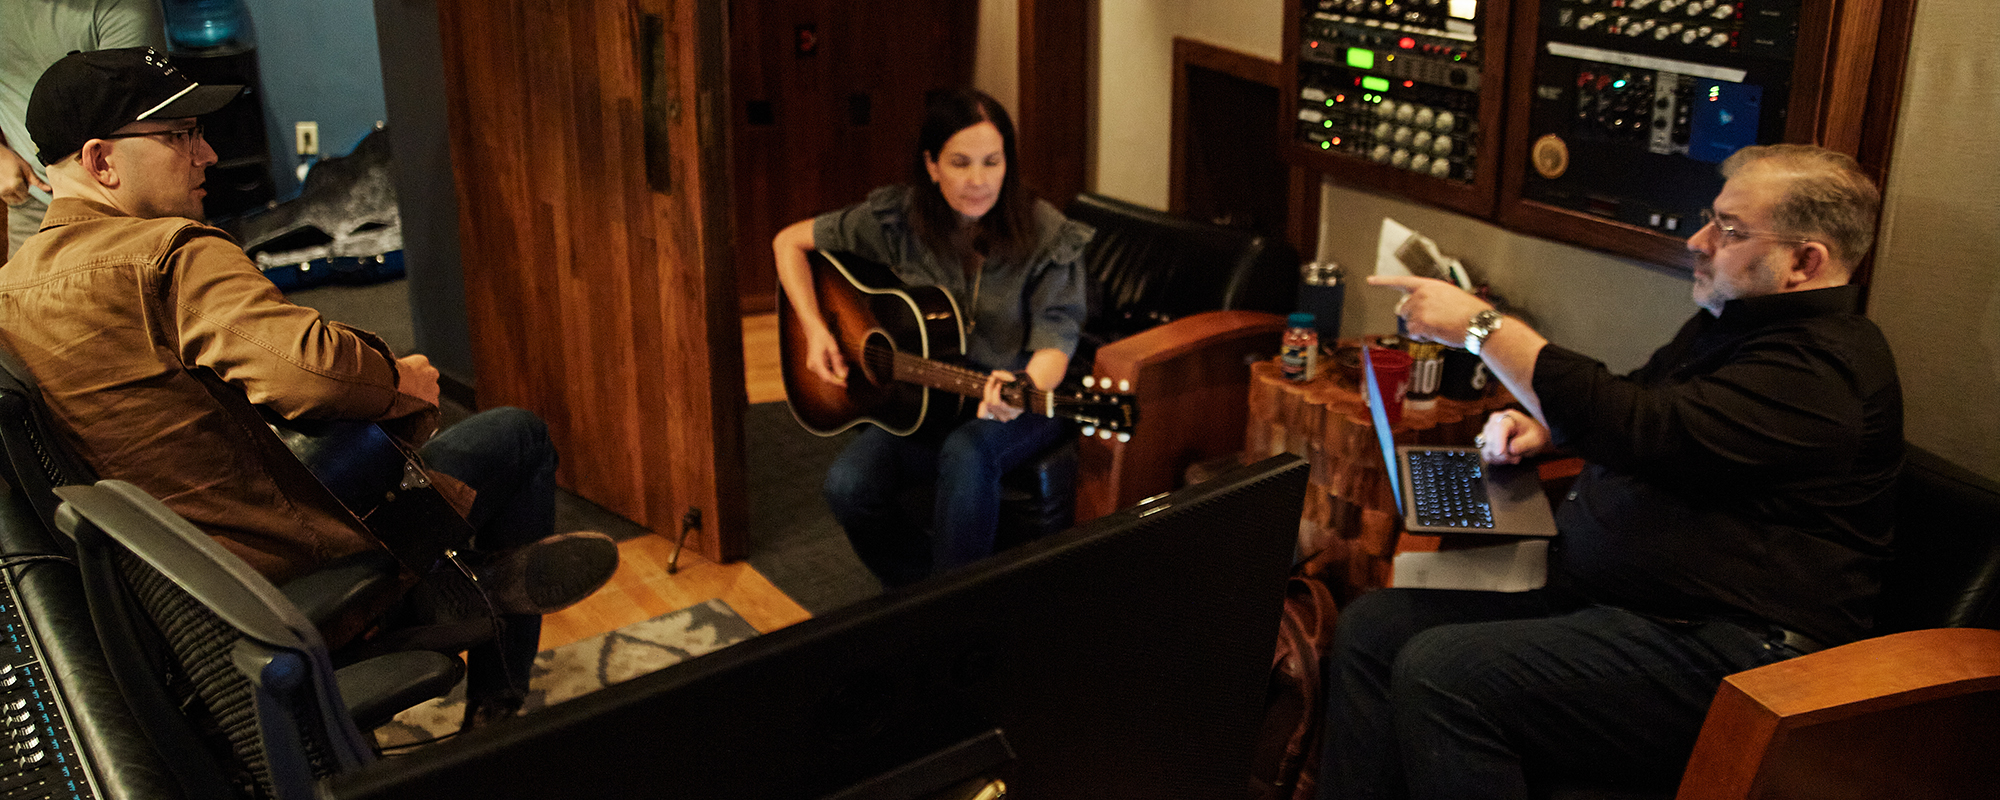 Luke Laird, Lori McKenna and Barry Dean Unveil ‘The Songwriter Tapes Vol. 2’